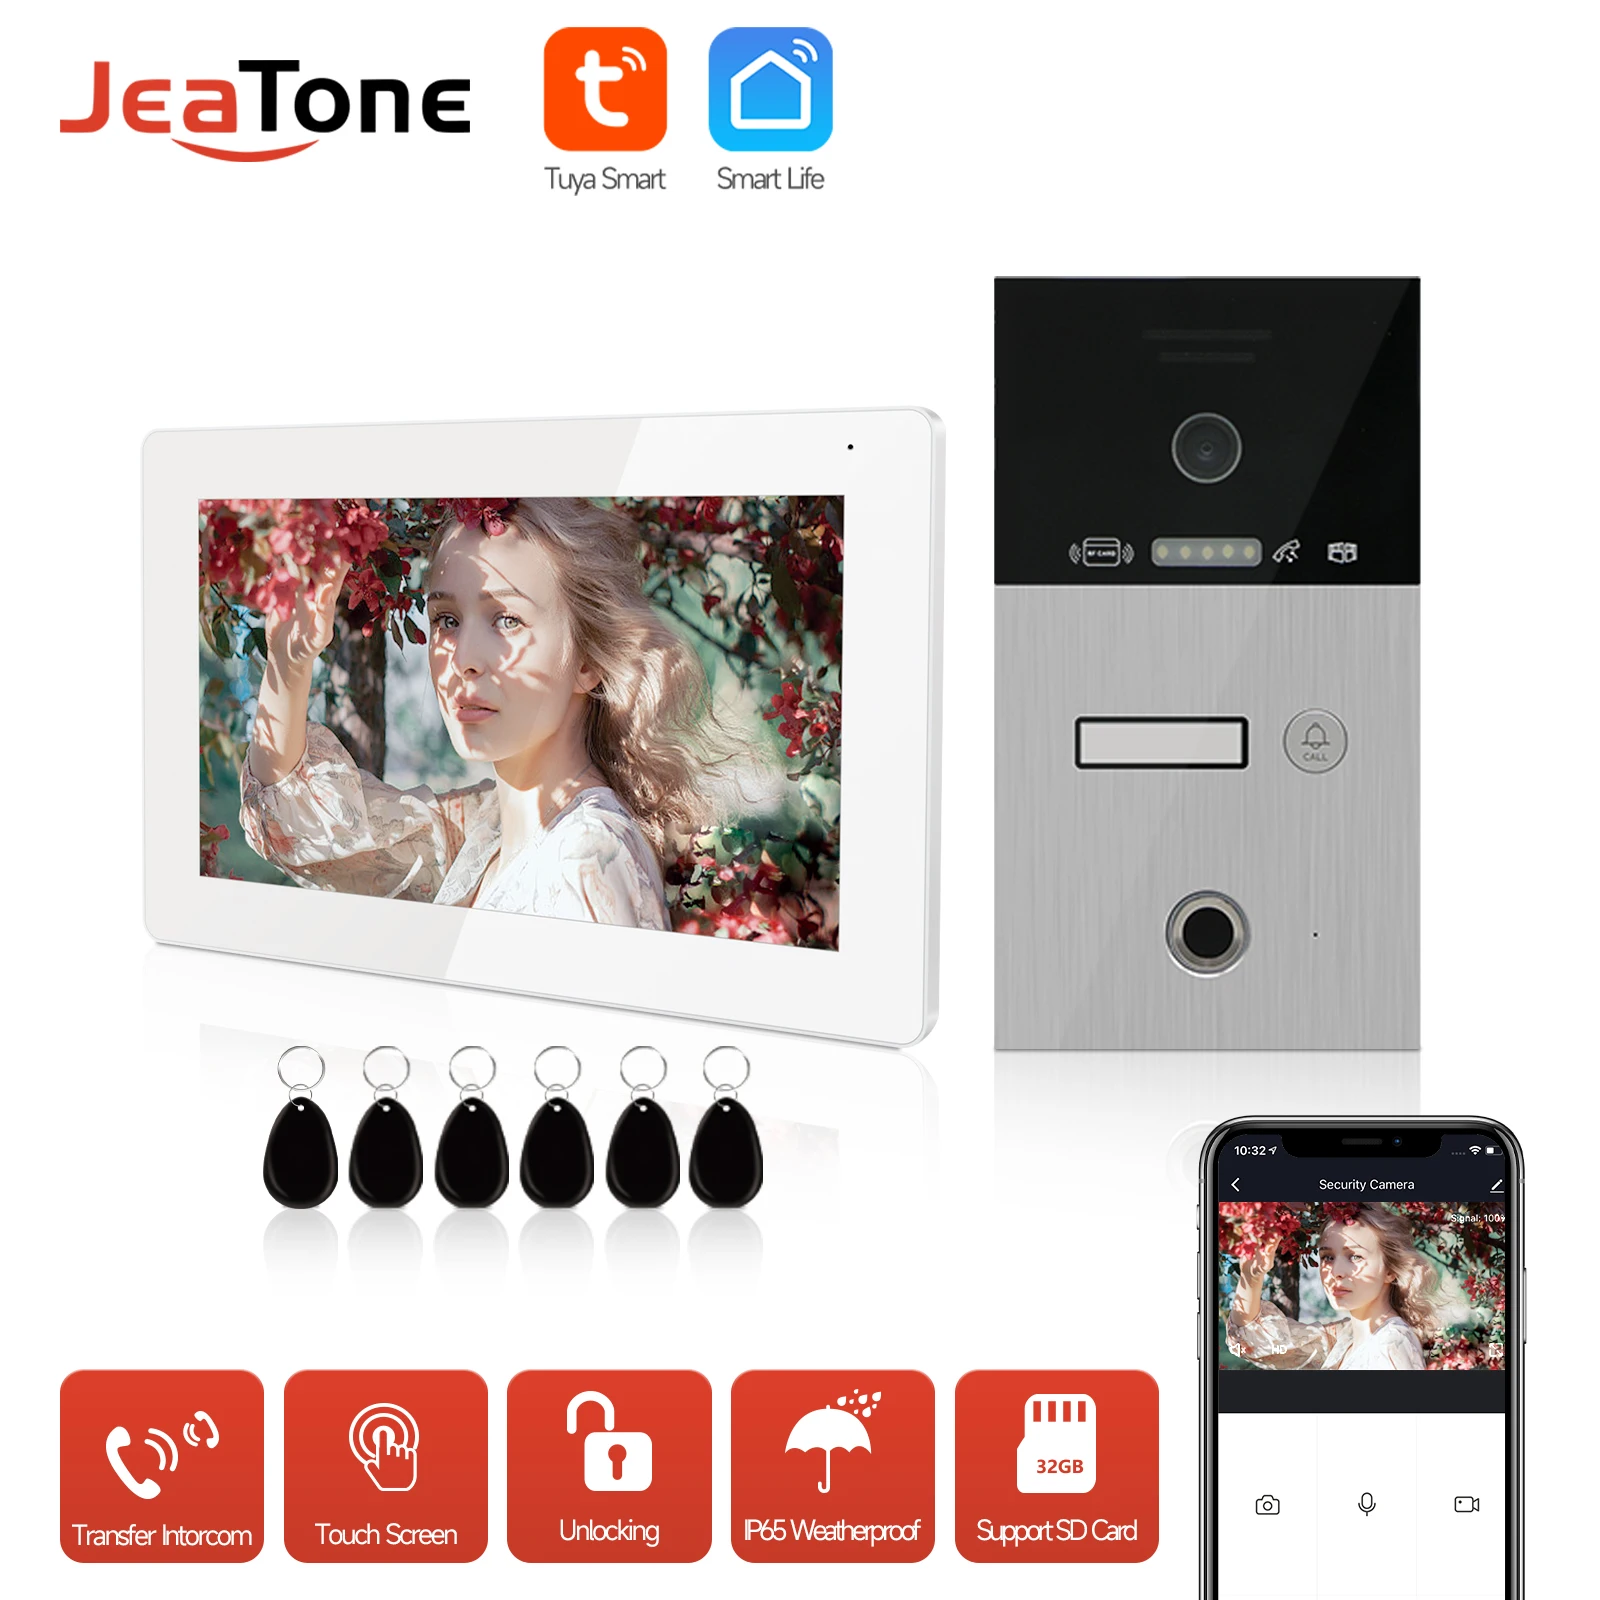 Jeatone TUYA 7” WIFI IP Video Intercom for Home/ in the Apartments 1F/2F/3F Security Protection Doorbell Fingerprint RFIC Coder